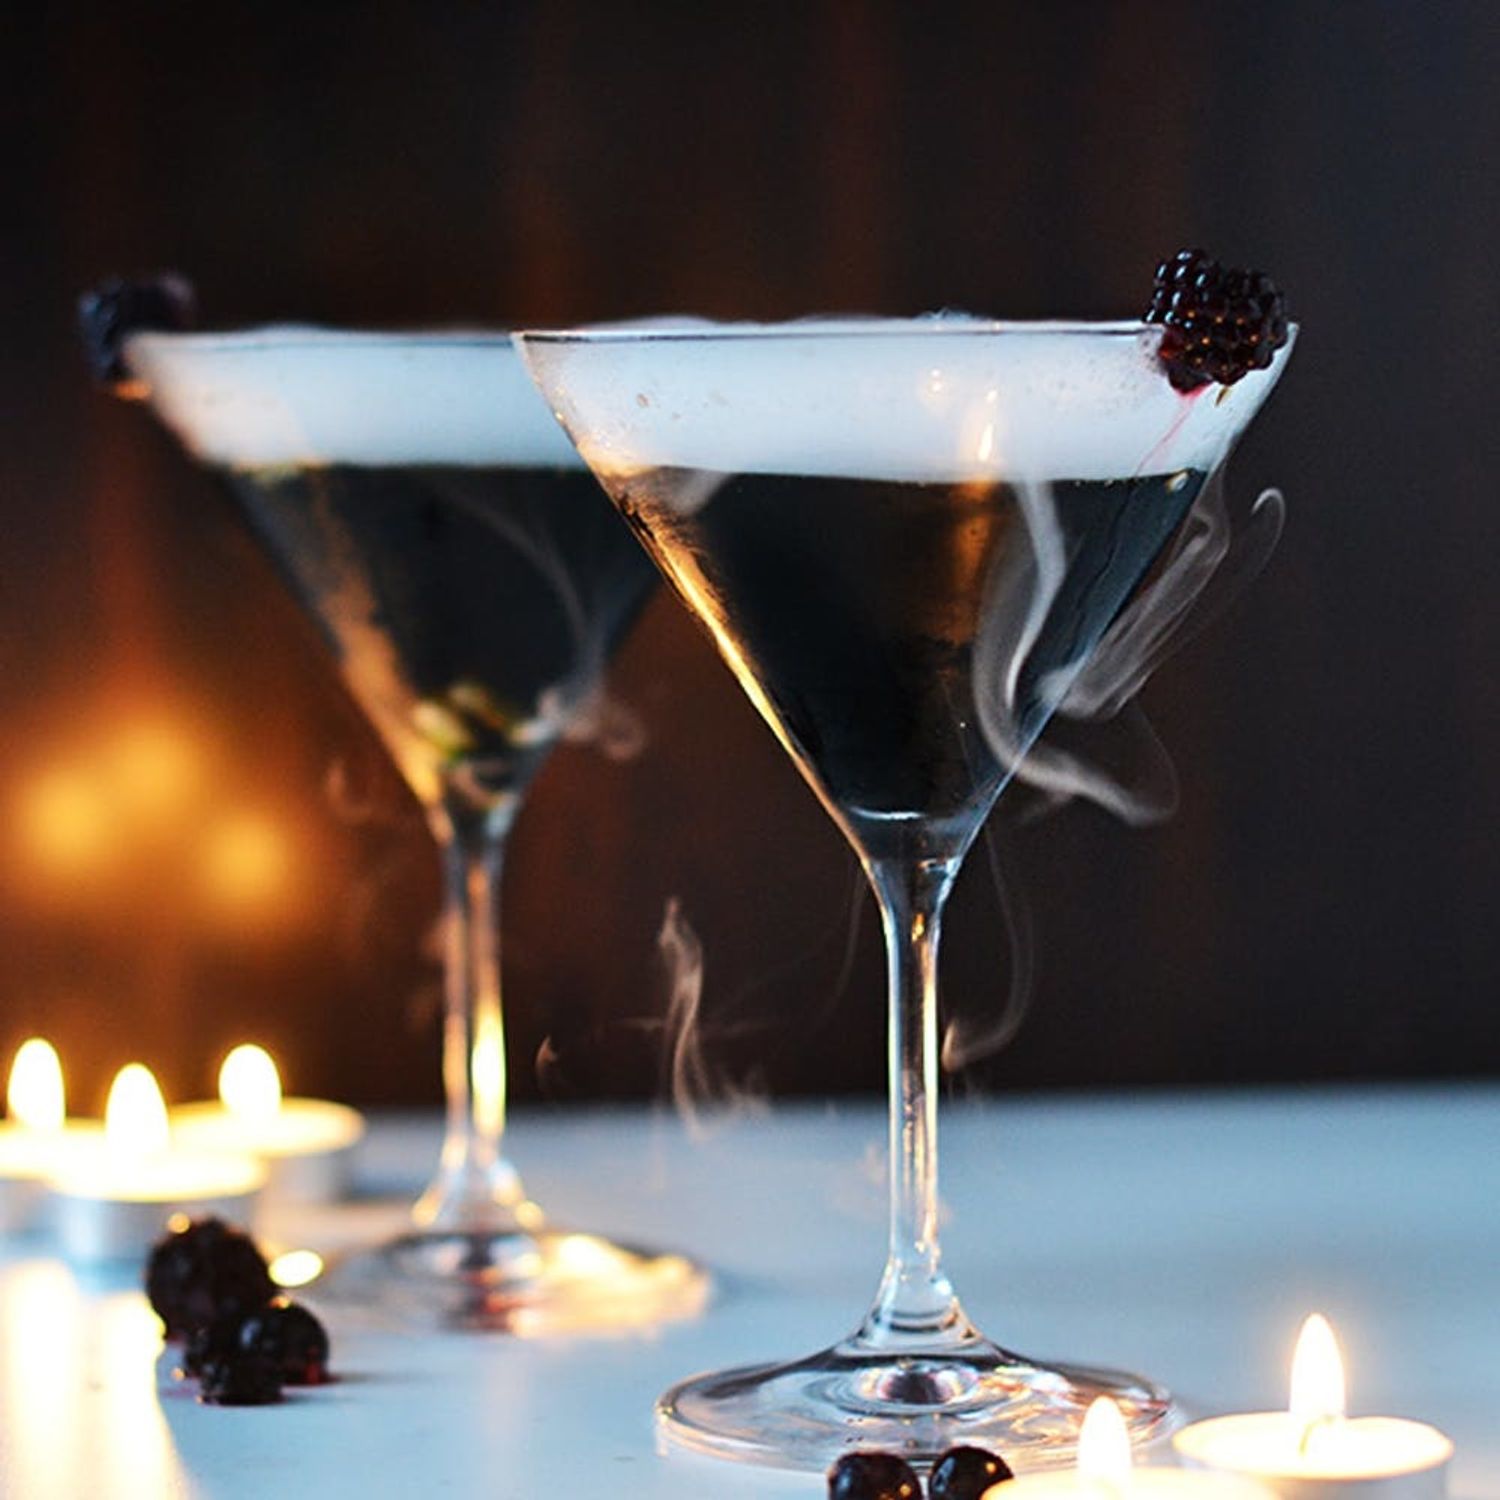 This Ghostly Halloween Cocktail Recipe Is Scary Delicious - Brit + Co